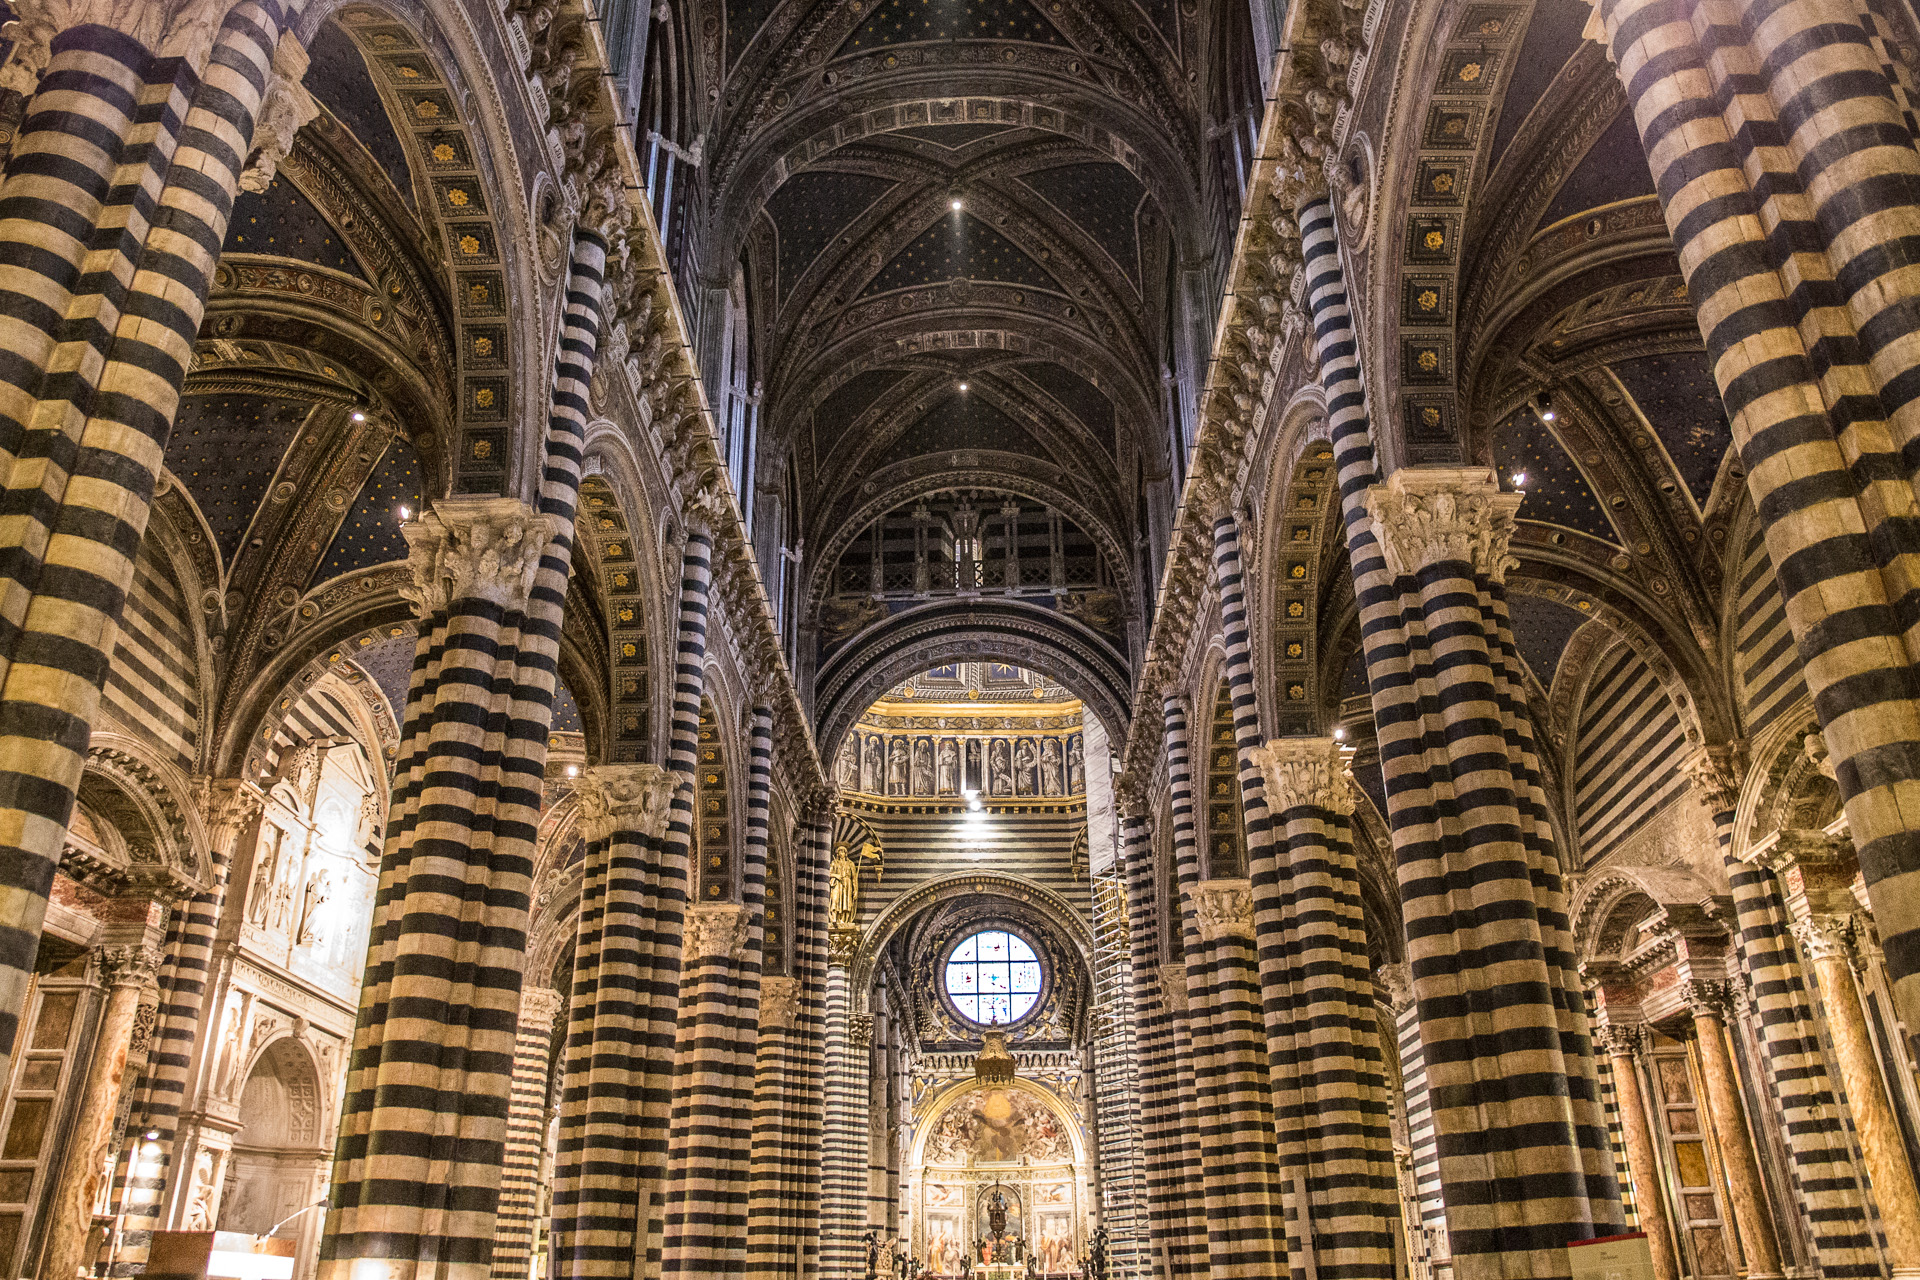 Inside the Siena Cathedral